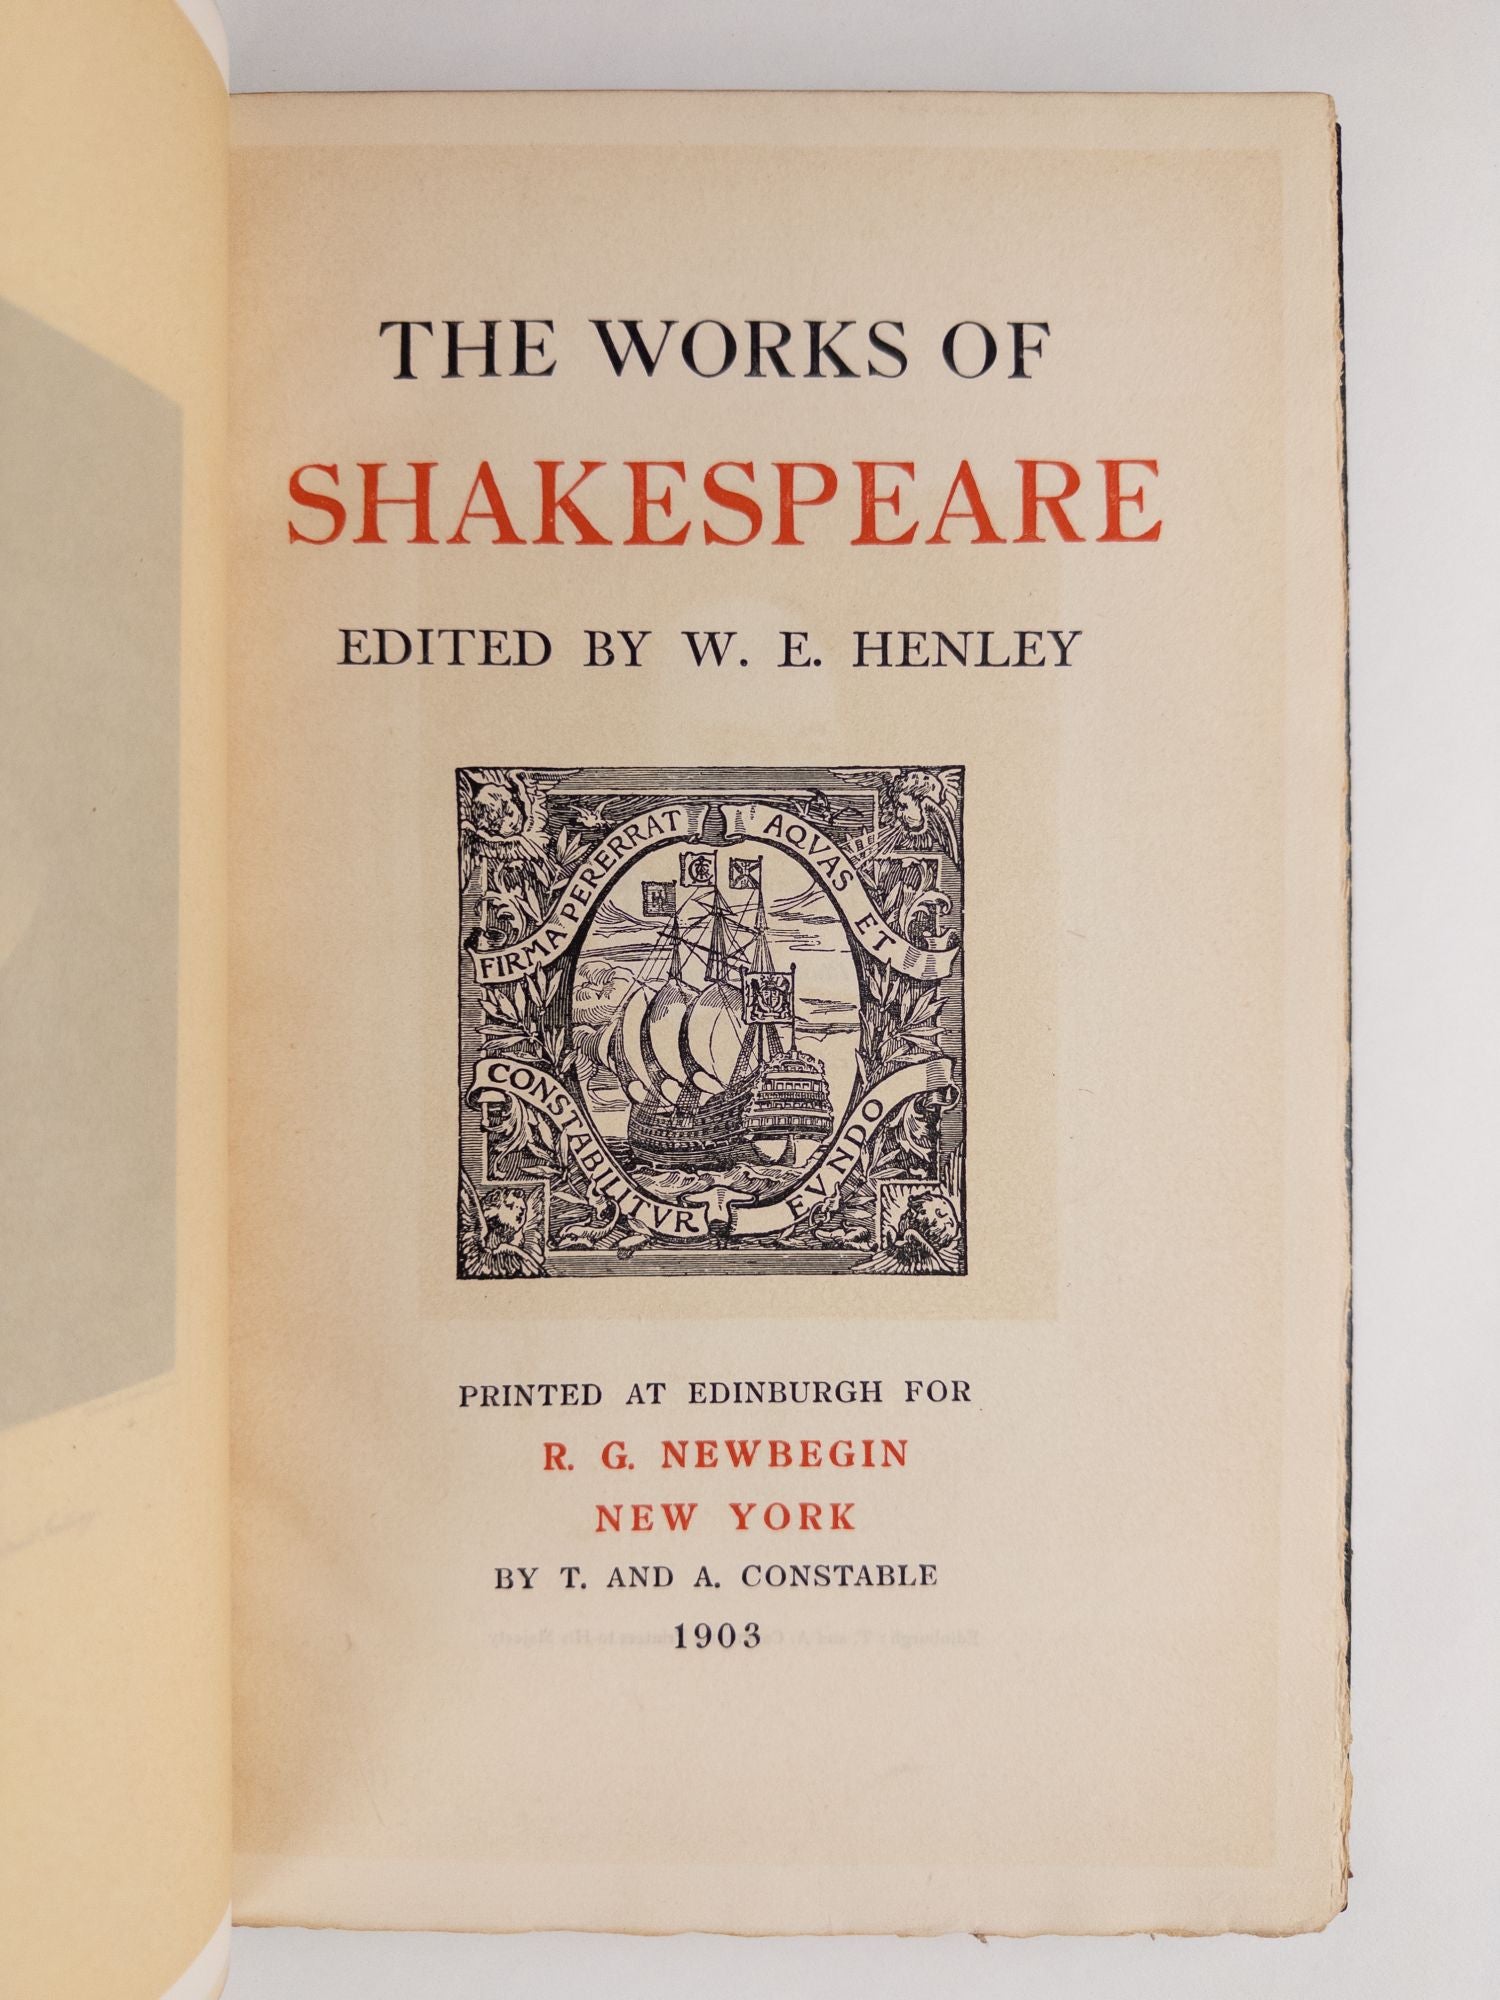 Product Image for THE WORKS OF SHAKESPEARE [Twenty Volumes]